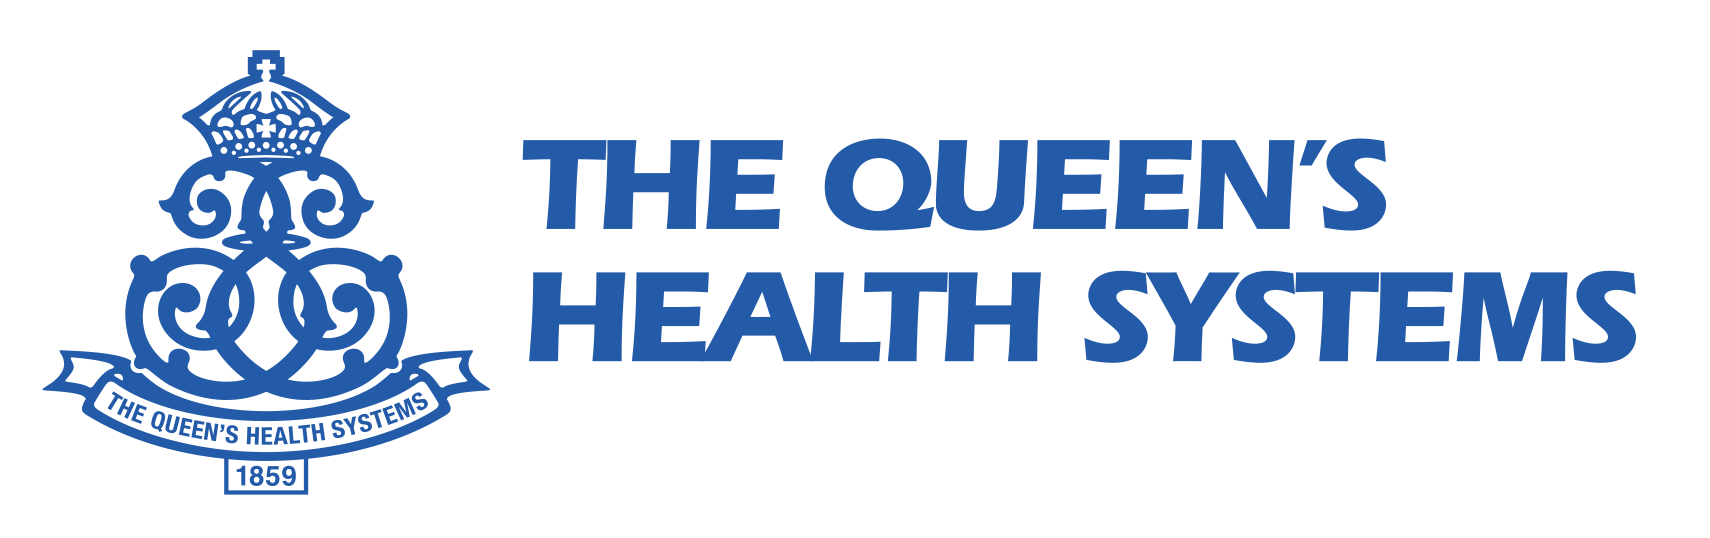 4. The Queen's Health Systems (Silver)